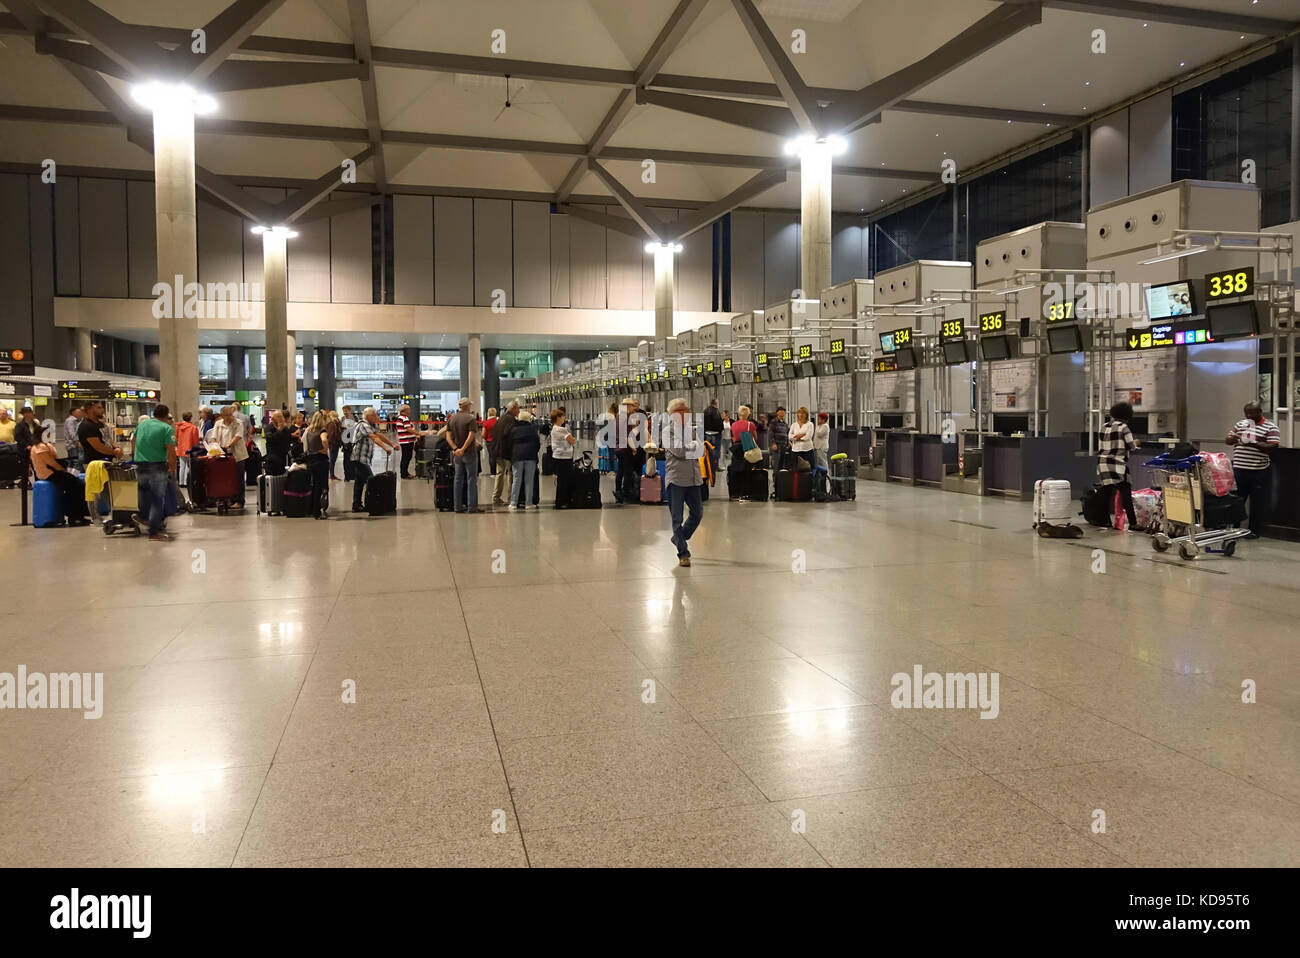 Passengers lining up at Airport check-in counters, check in counter, Malaga, Costa del sol, Spain Stock Photo